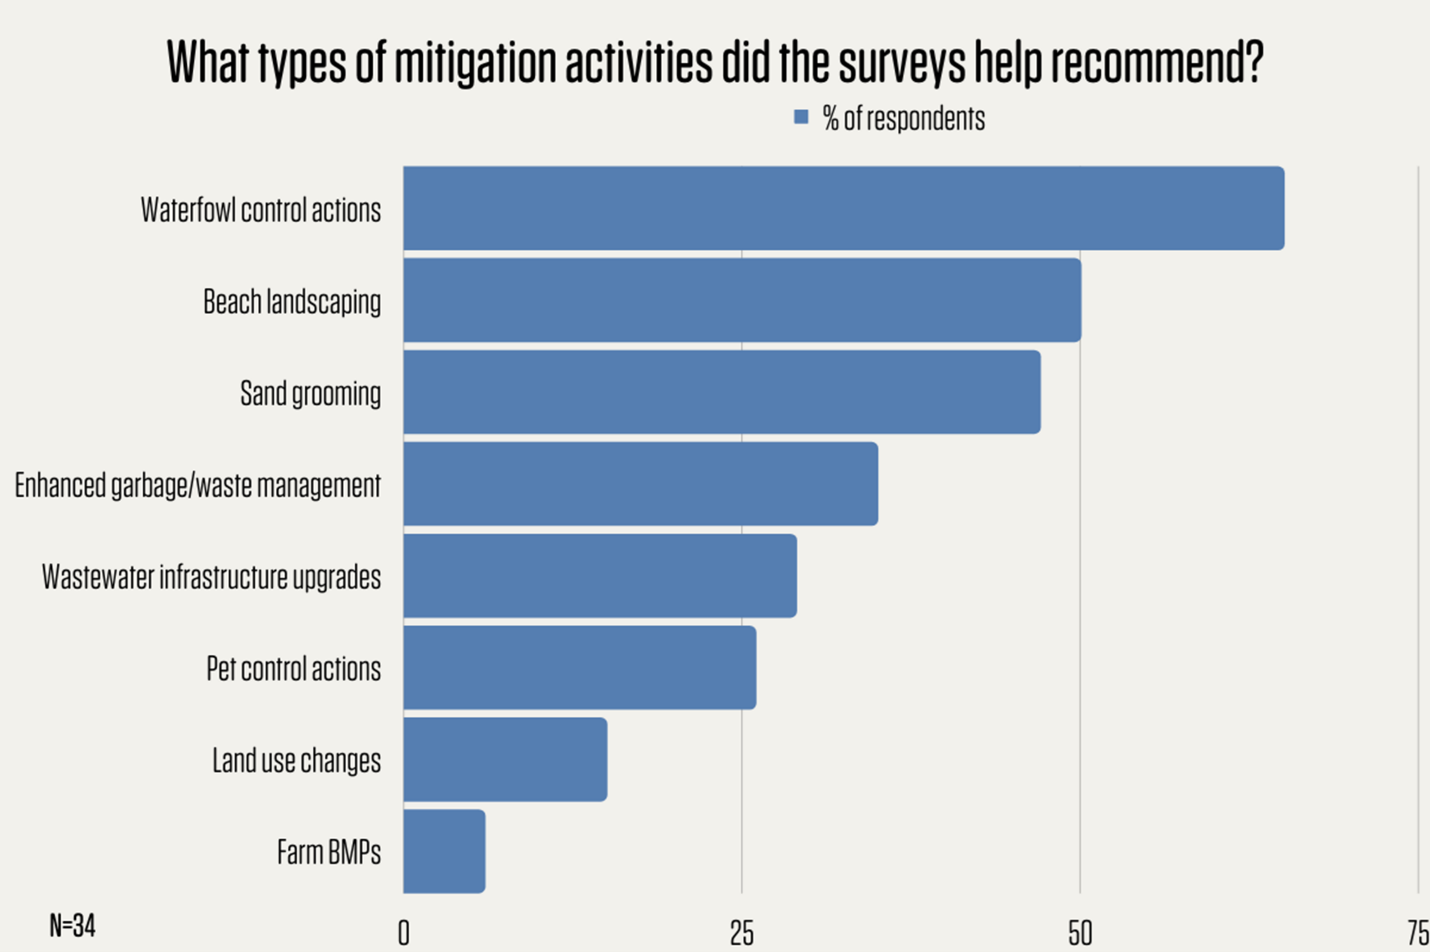 types of mitigation activities recommended 